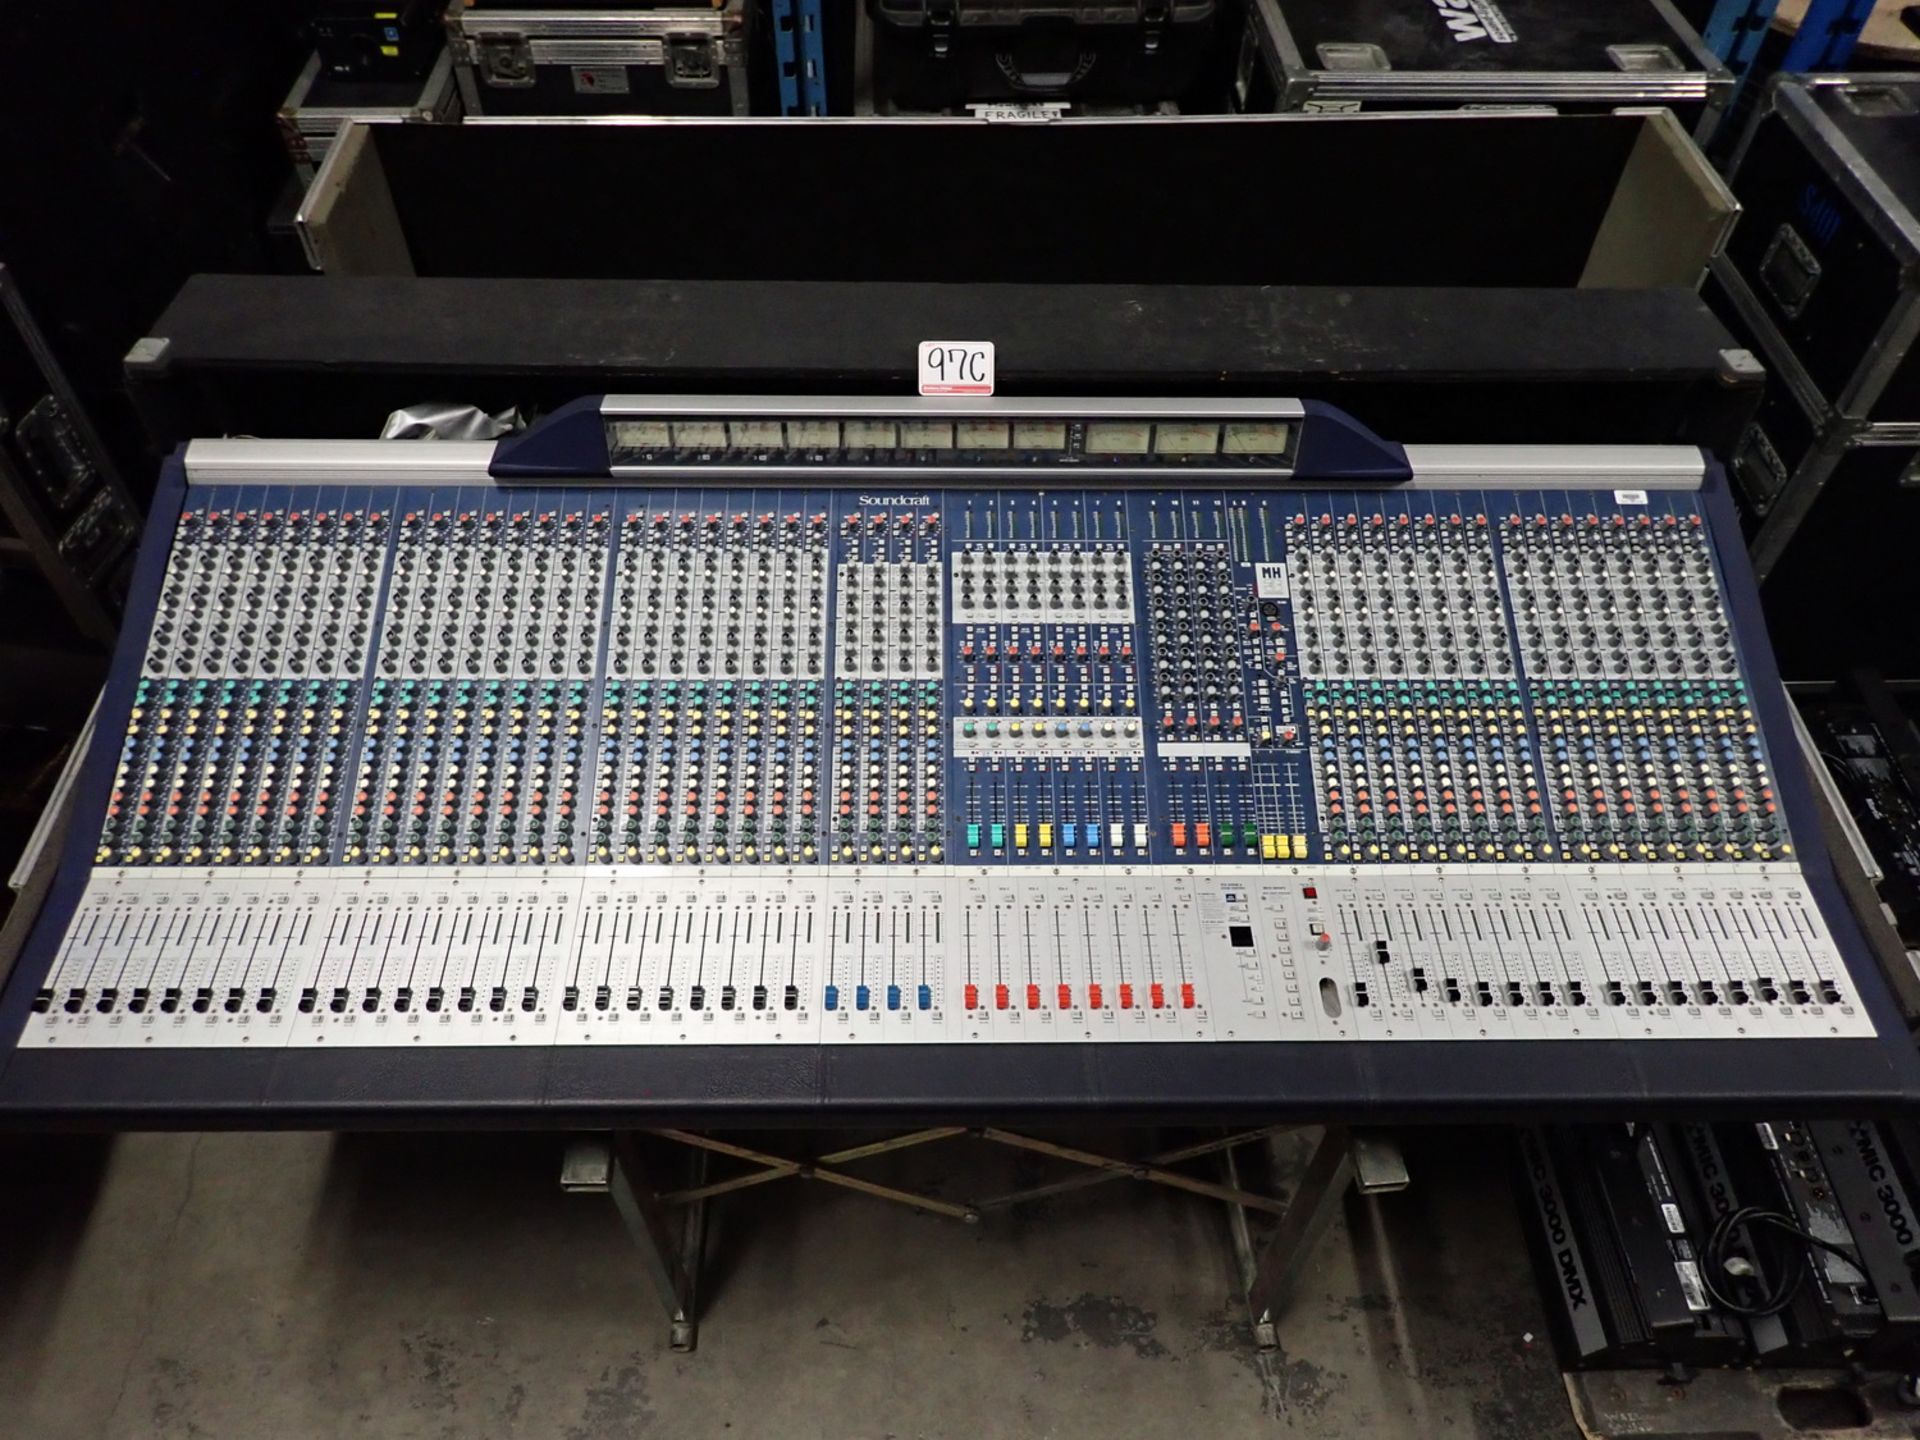 SOUND CRAFT MH3 32 +4 MIXING CONSOLE C/W ROLLING HARDCASE